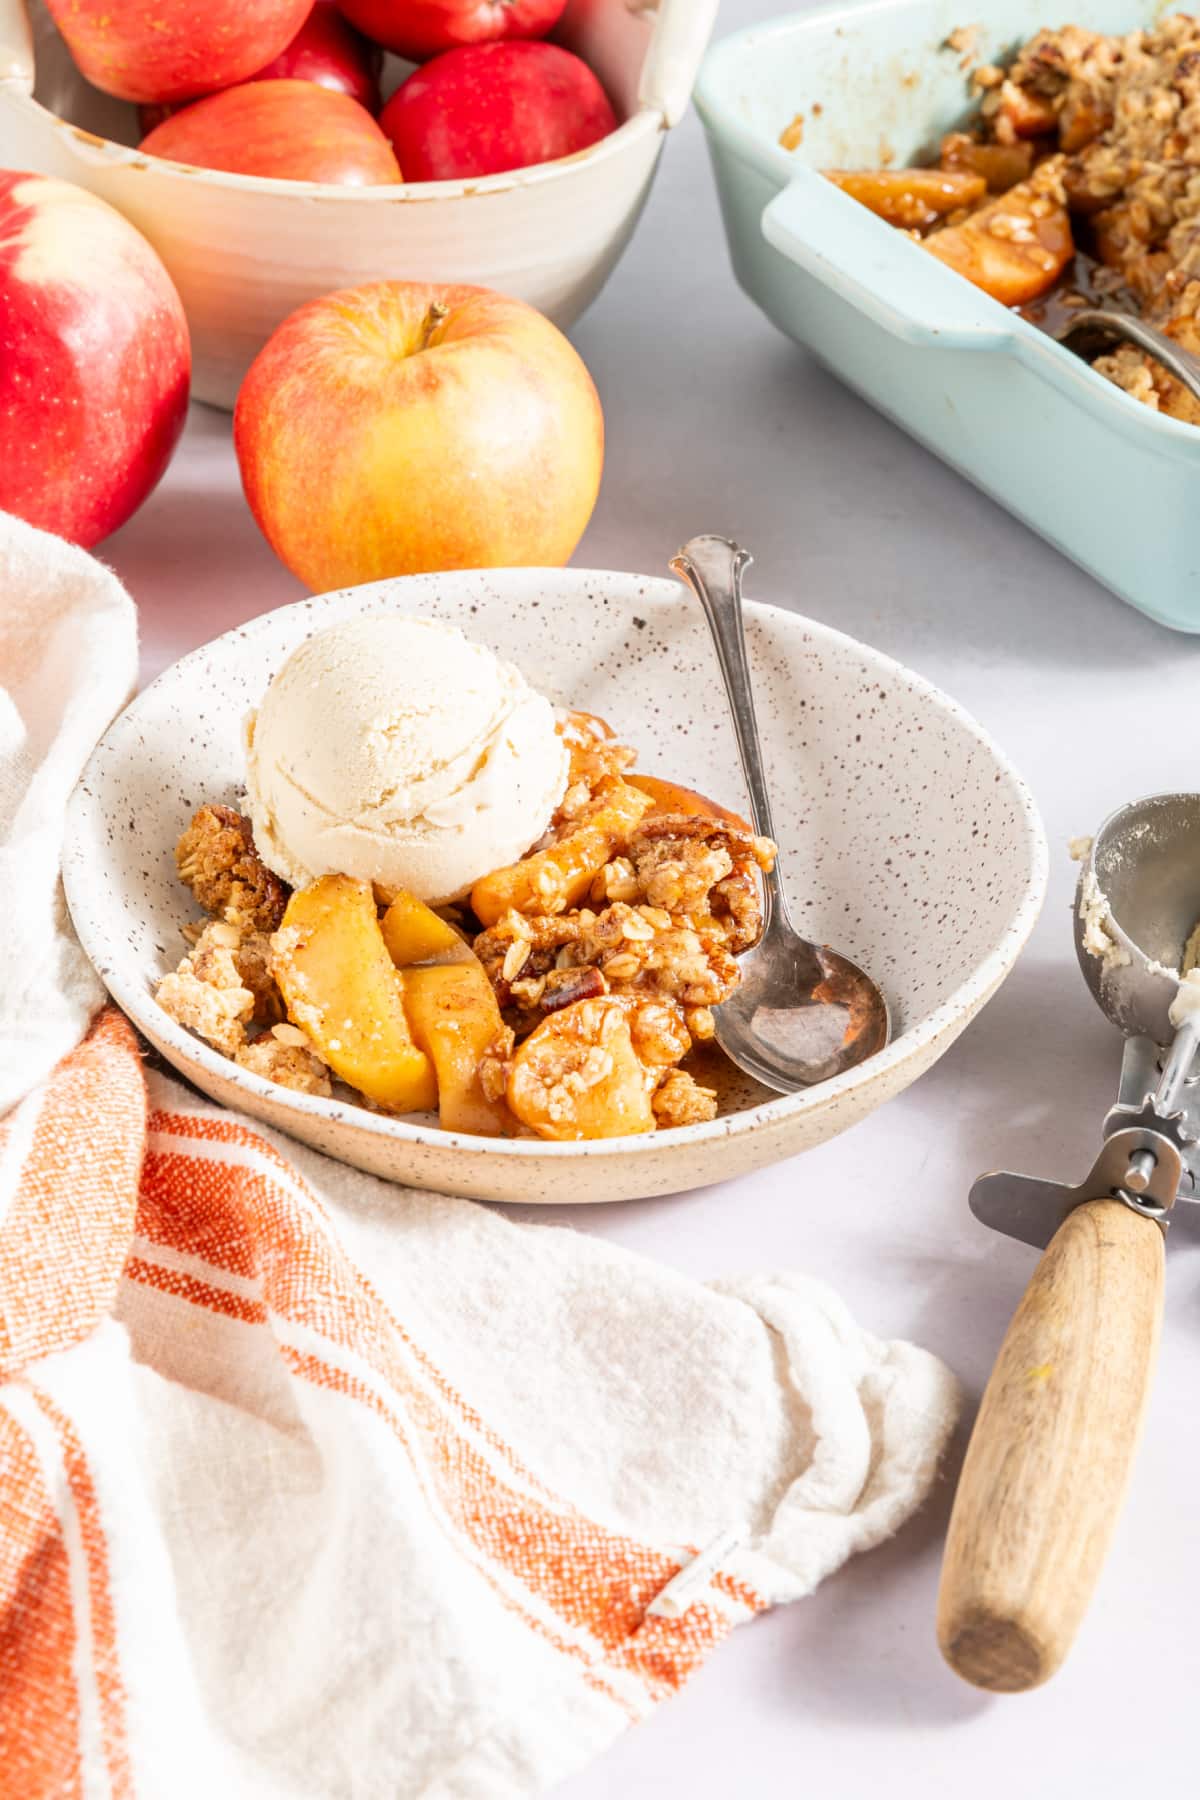 One serving of the gluten free apple crisp and vanilla ice cream in a white bowl. The baking dish of apple crisp and a bowl of apples sits behind.